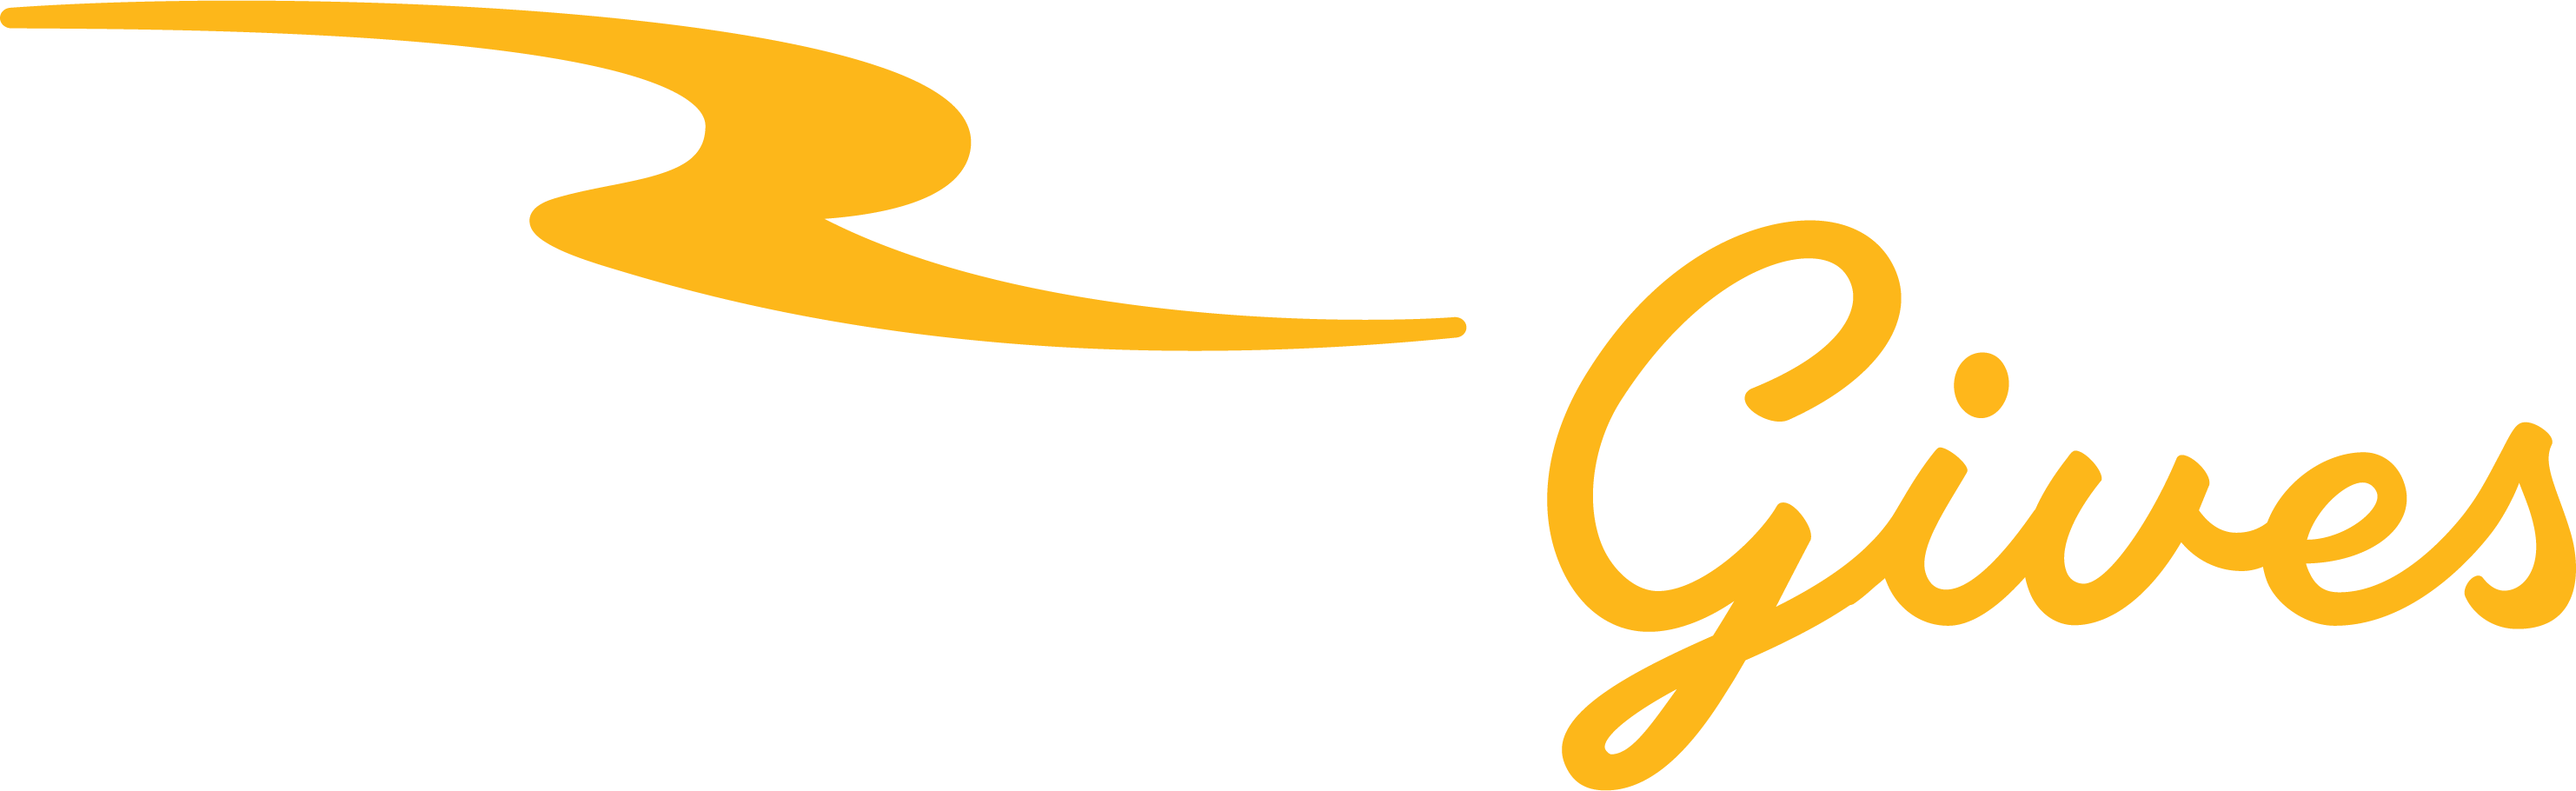 Rivers Gives Rivers Casino Community volunteer local non-profit pittsburgh non-profits 